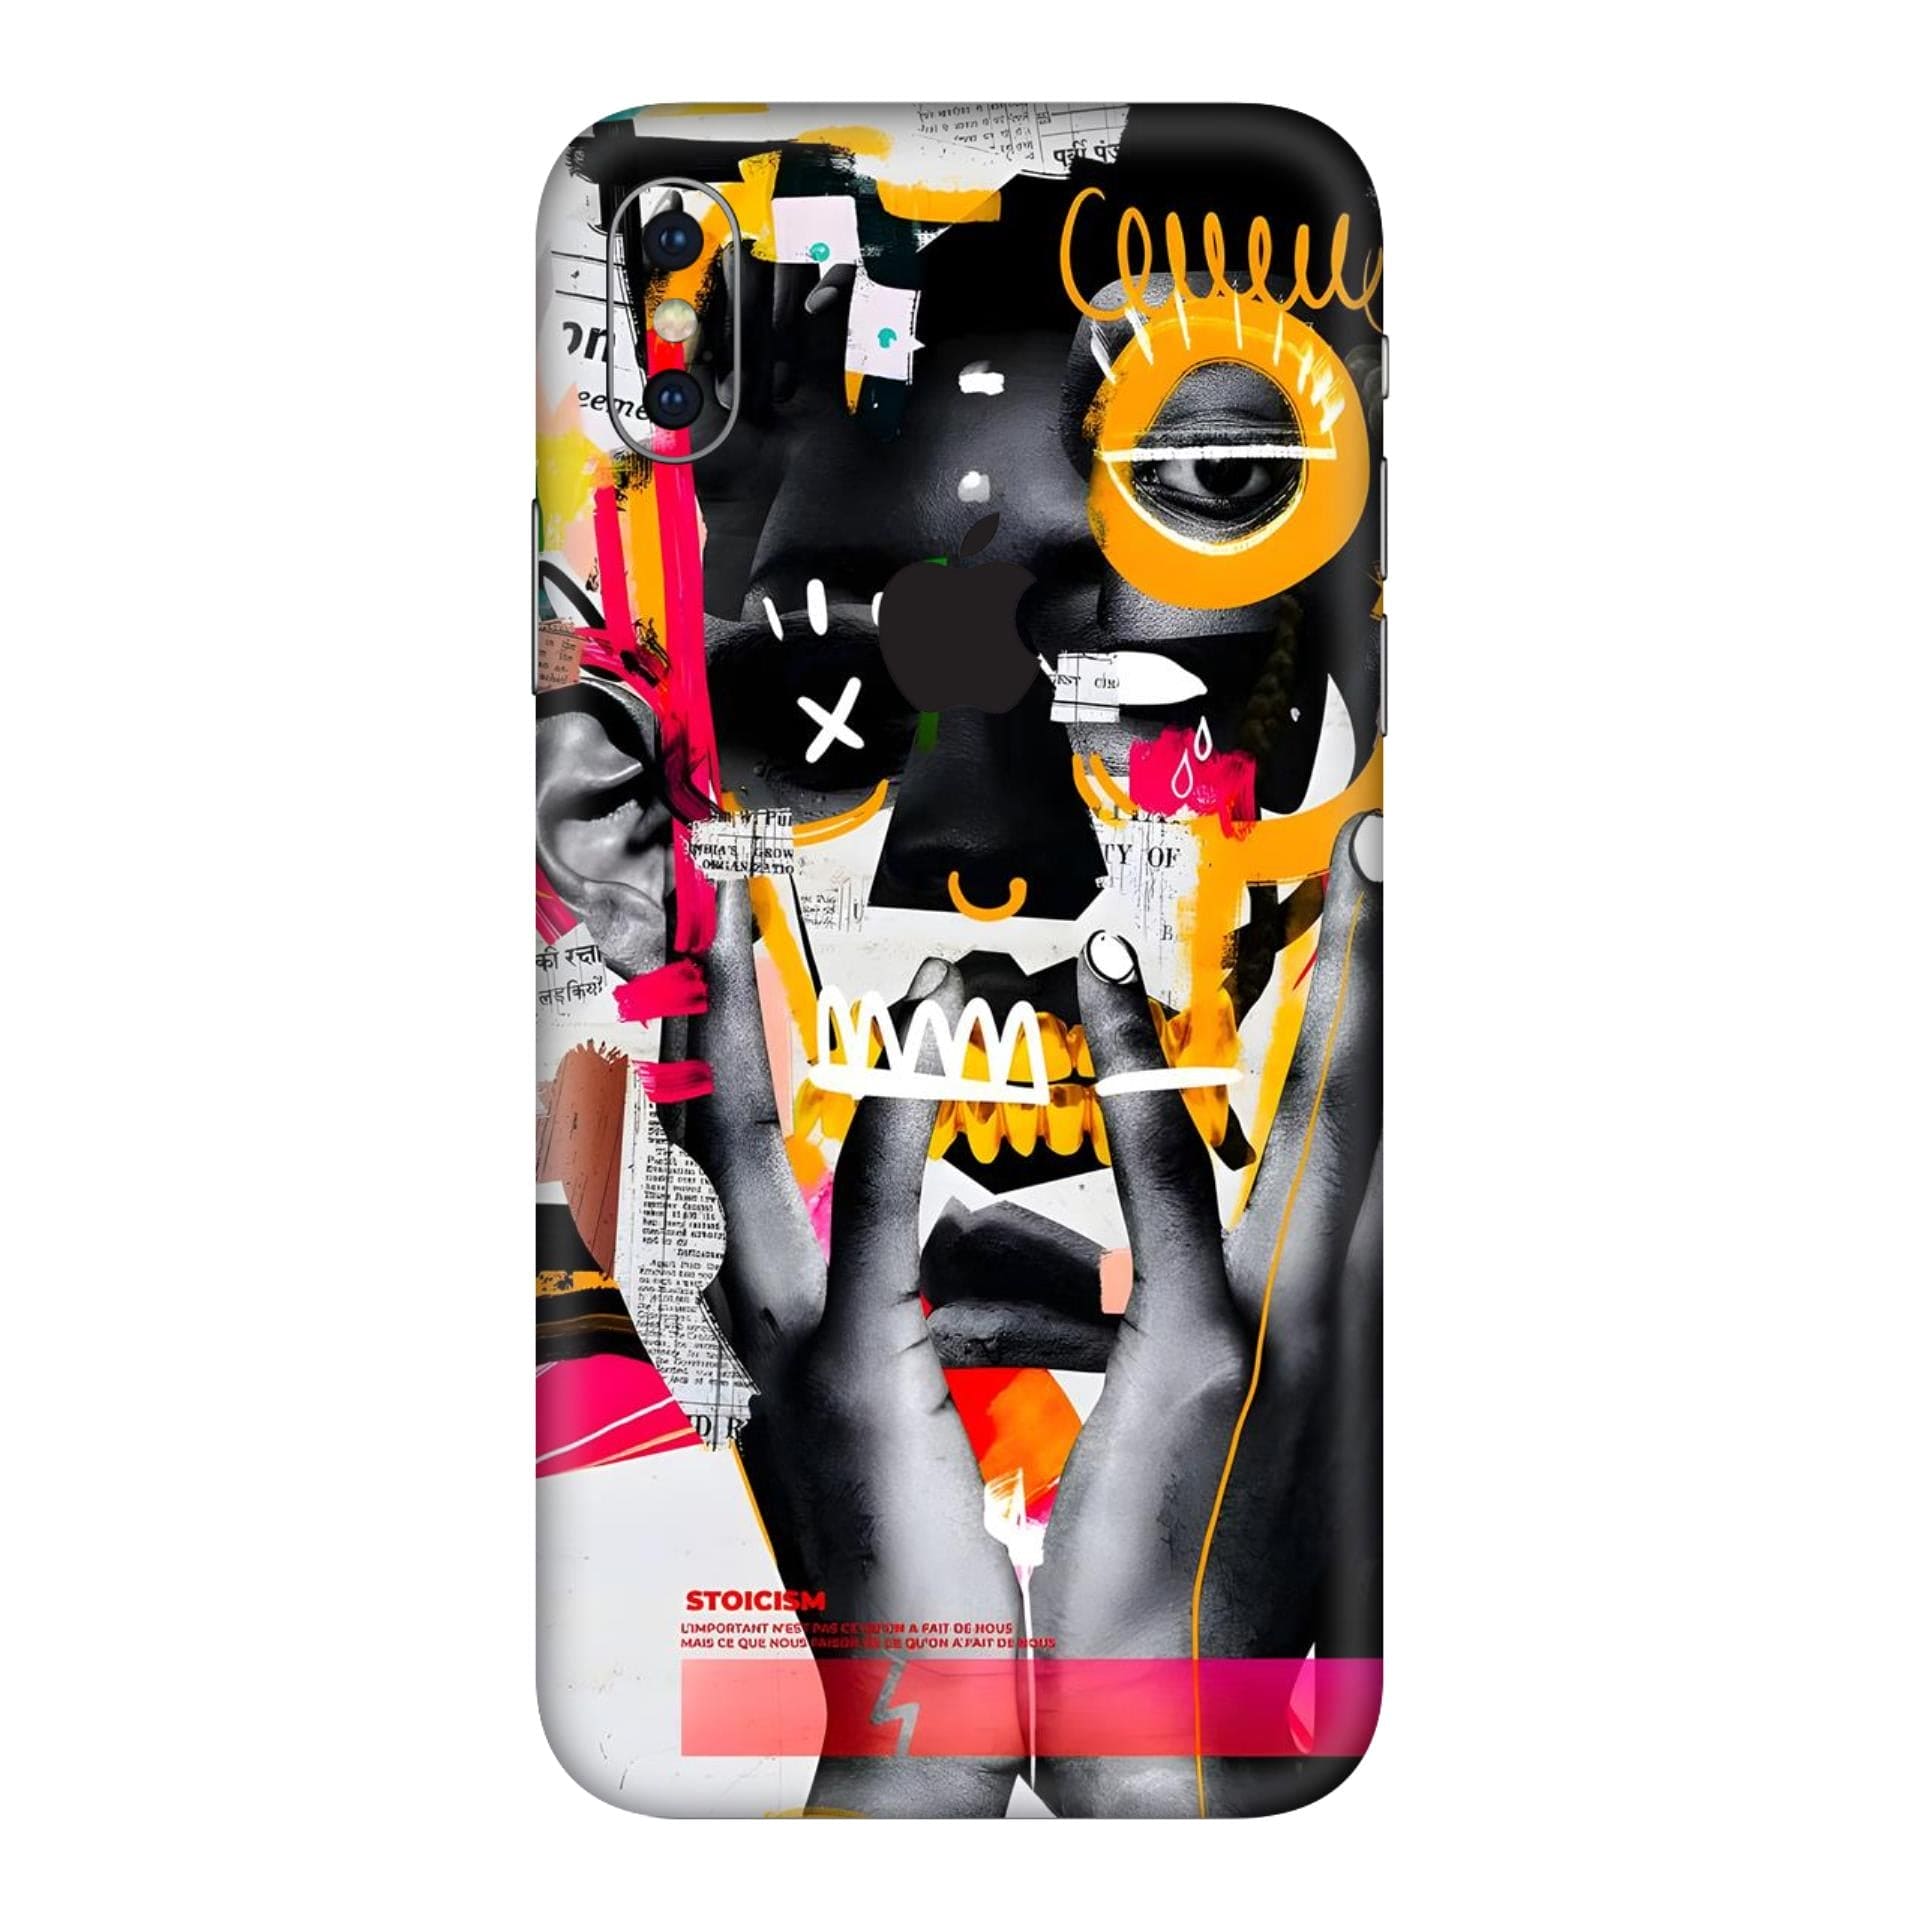 iphone XS Stoicism skins